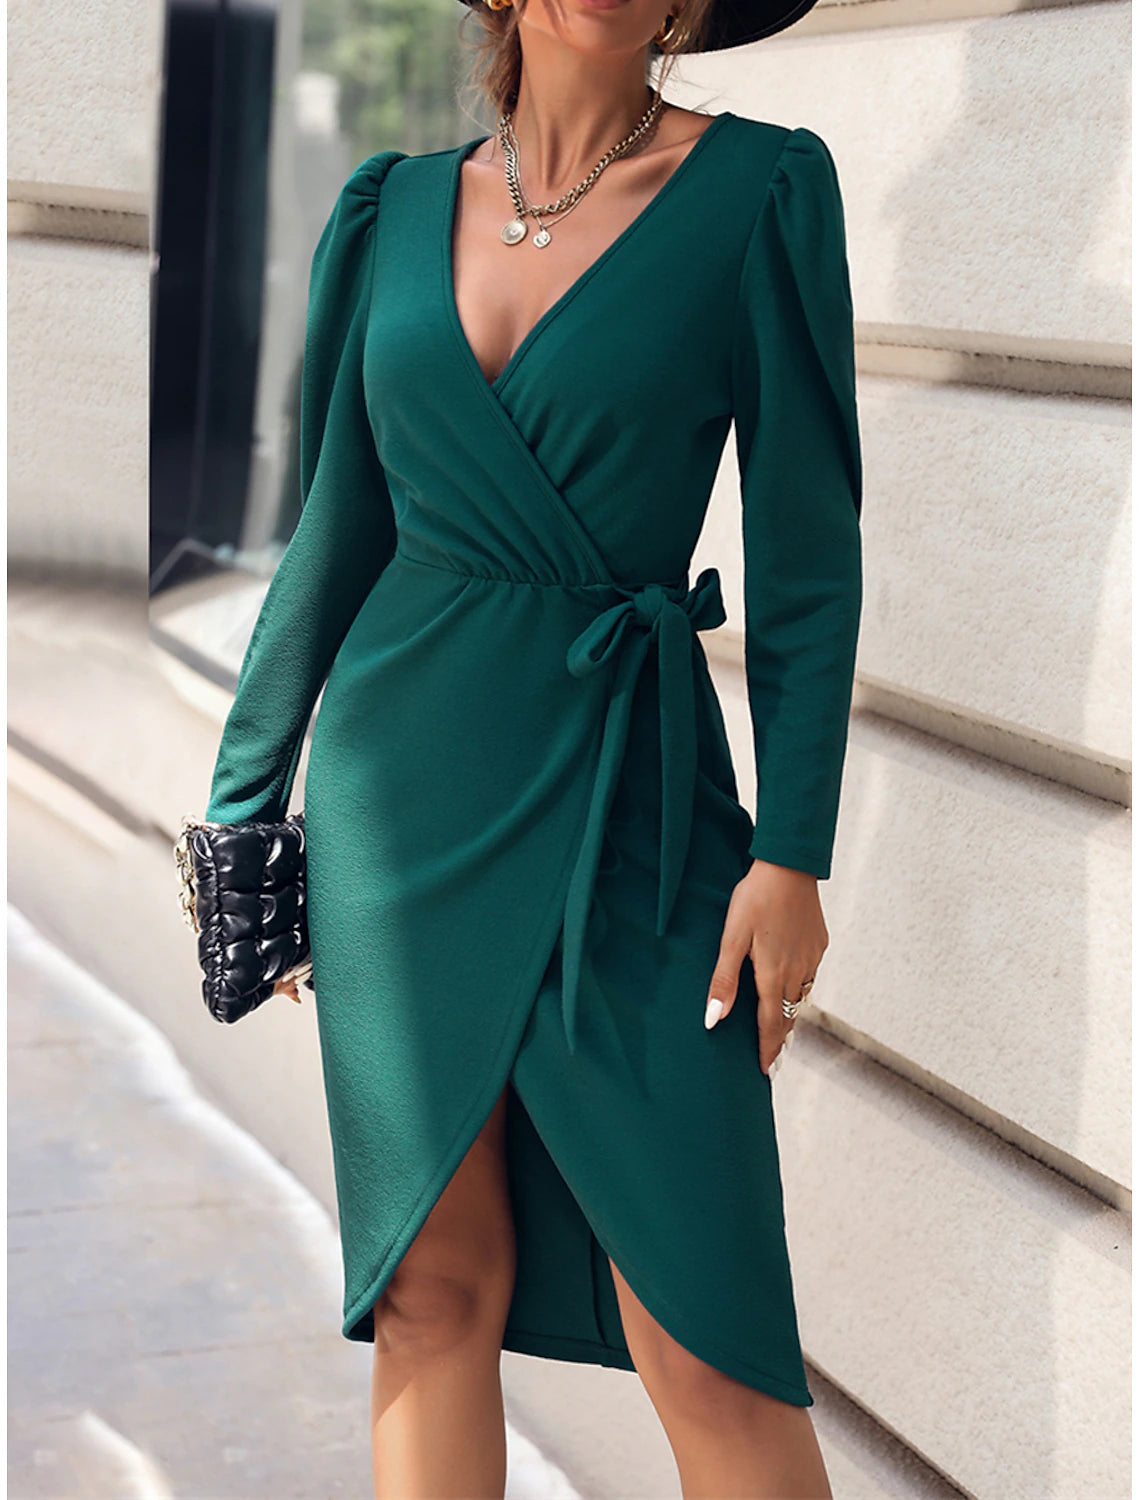 Women's Party Dress Cocktail Dress Green Dress Lace up Ruched V Neck Long Sleeve Midi Dress Christmas Birthday Green Spring Winter